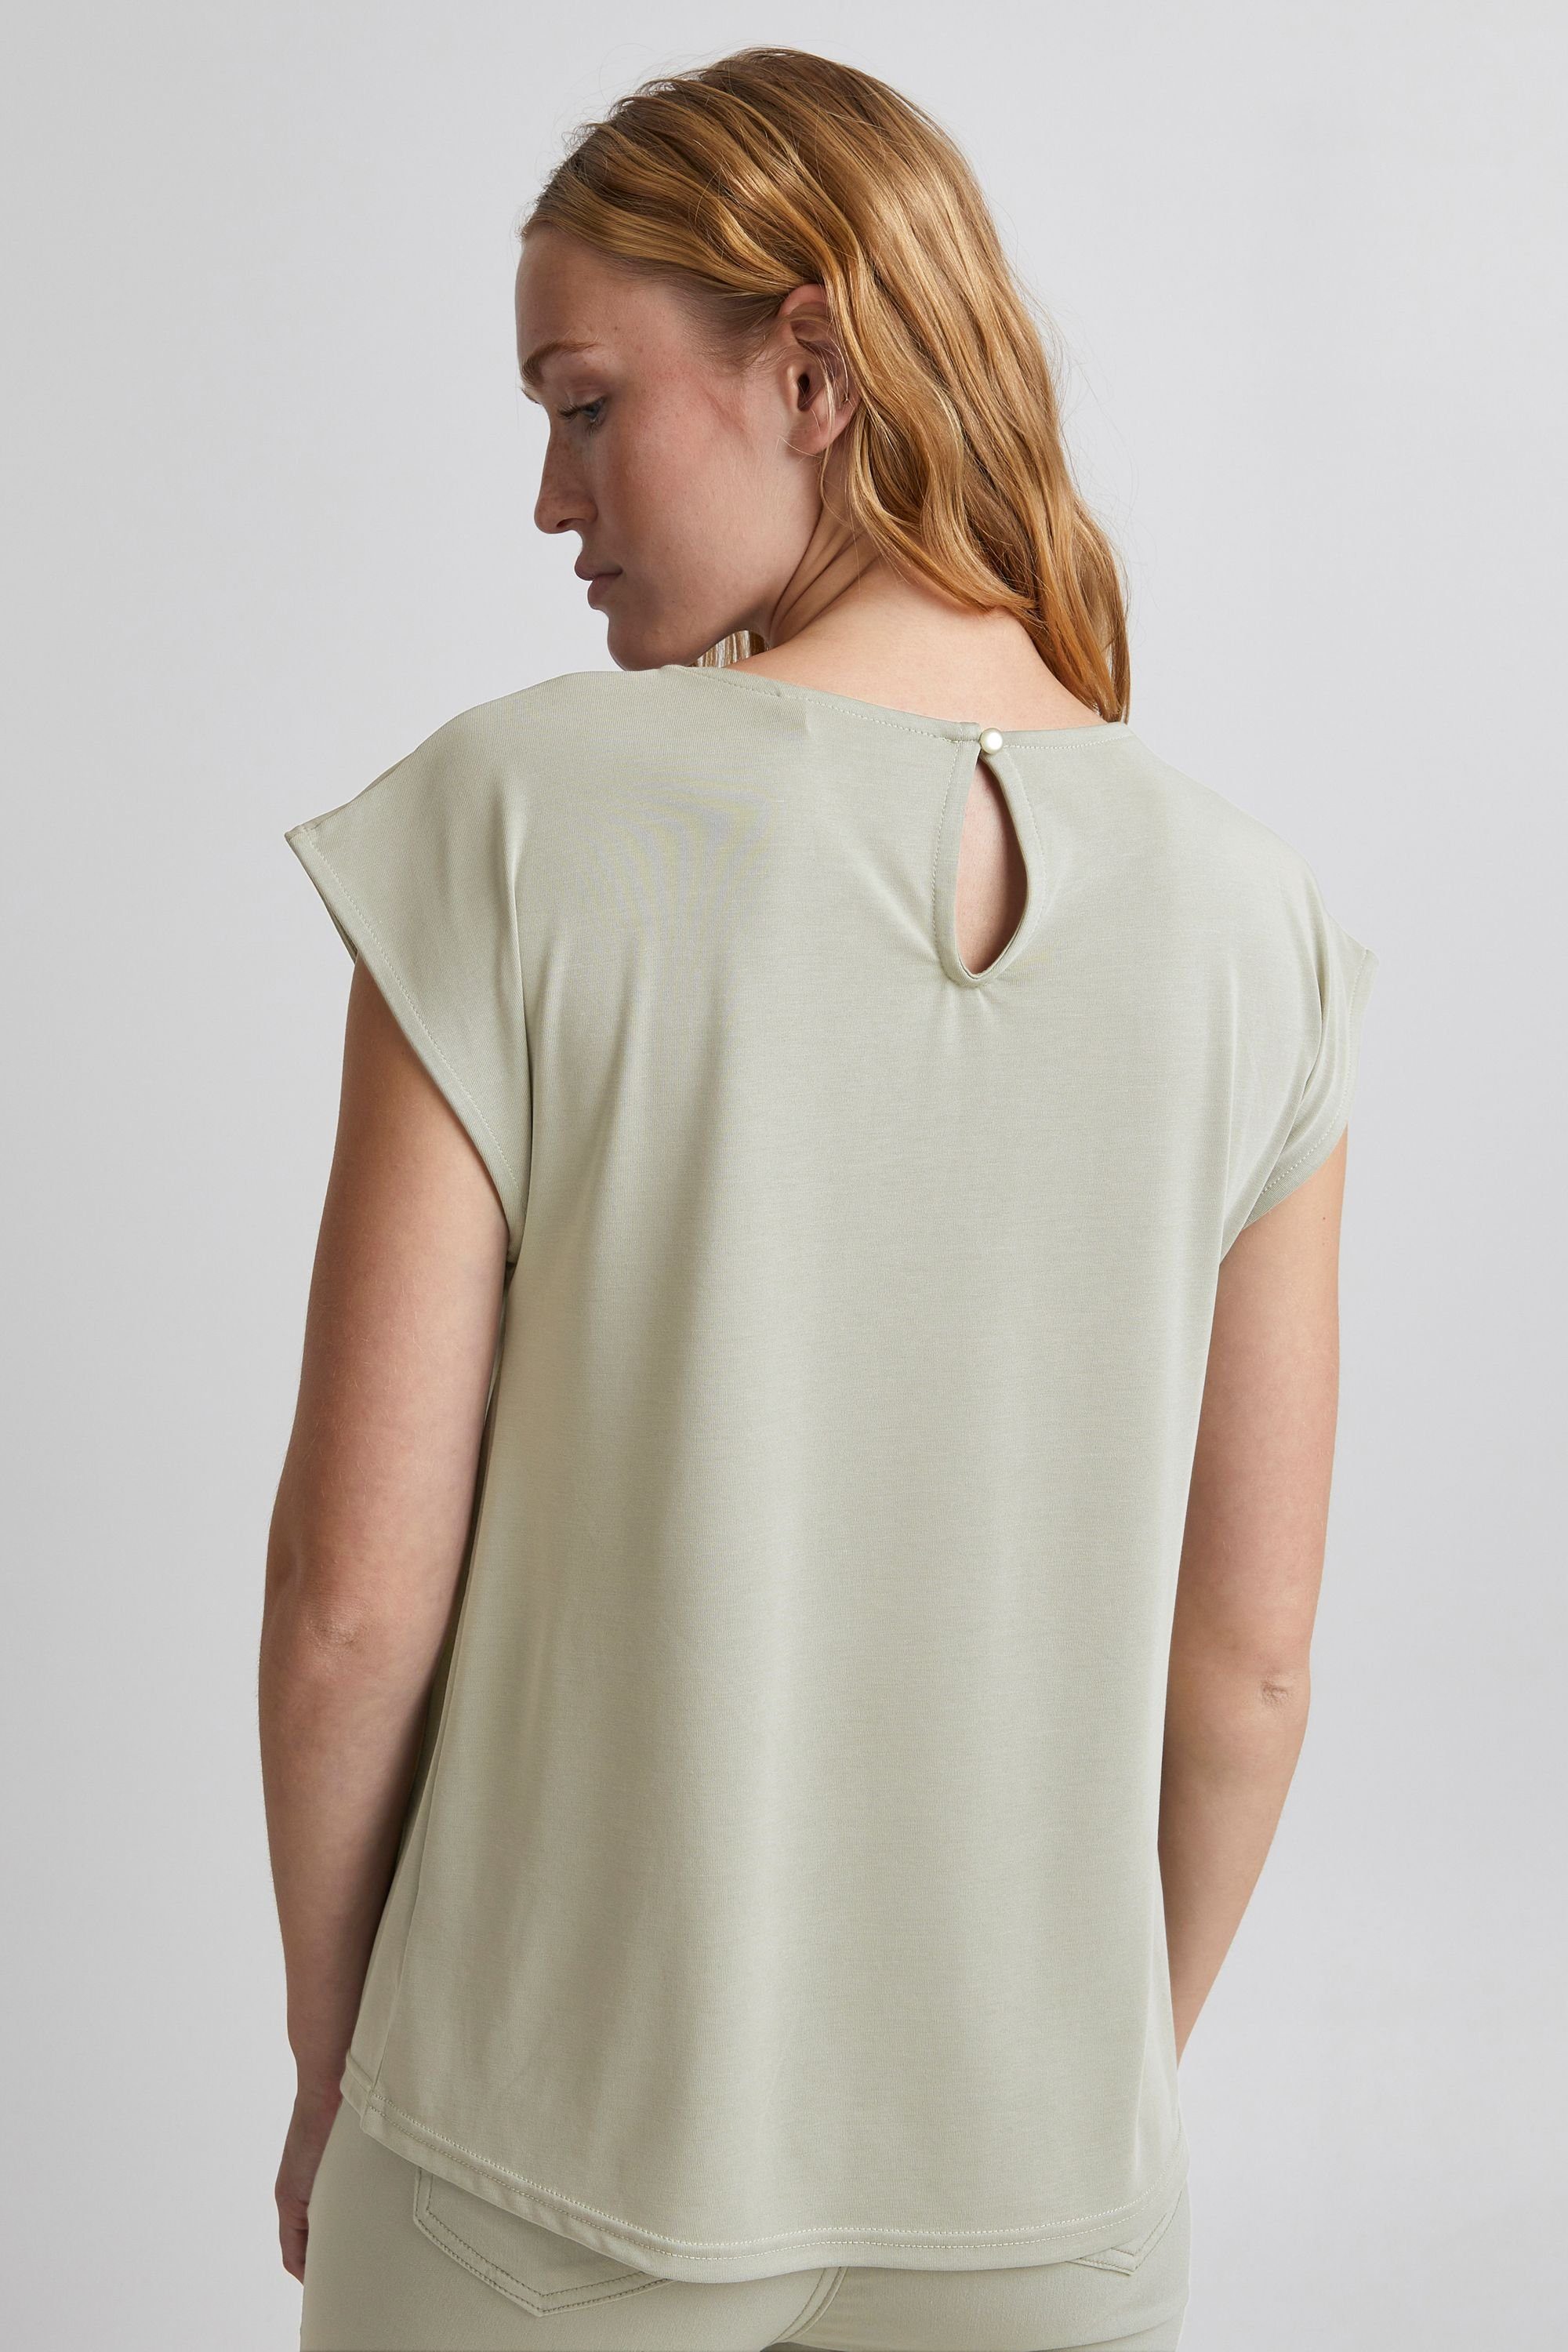 -20811284 BYPERL b.young Shirtbluse (166008) TOP Seagrass